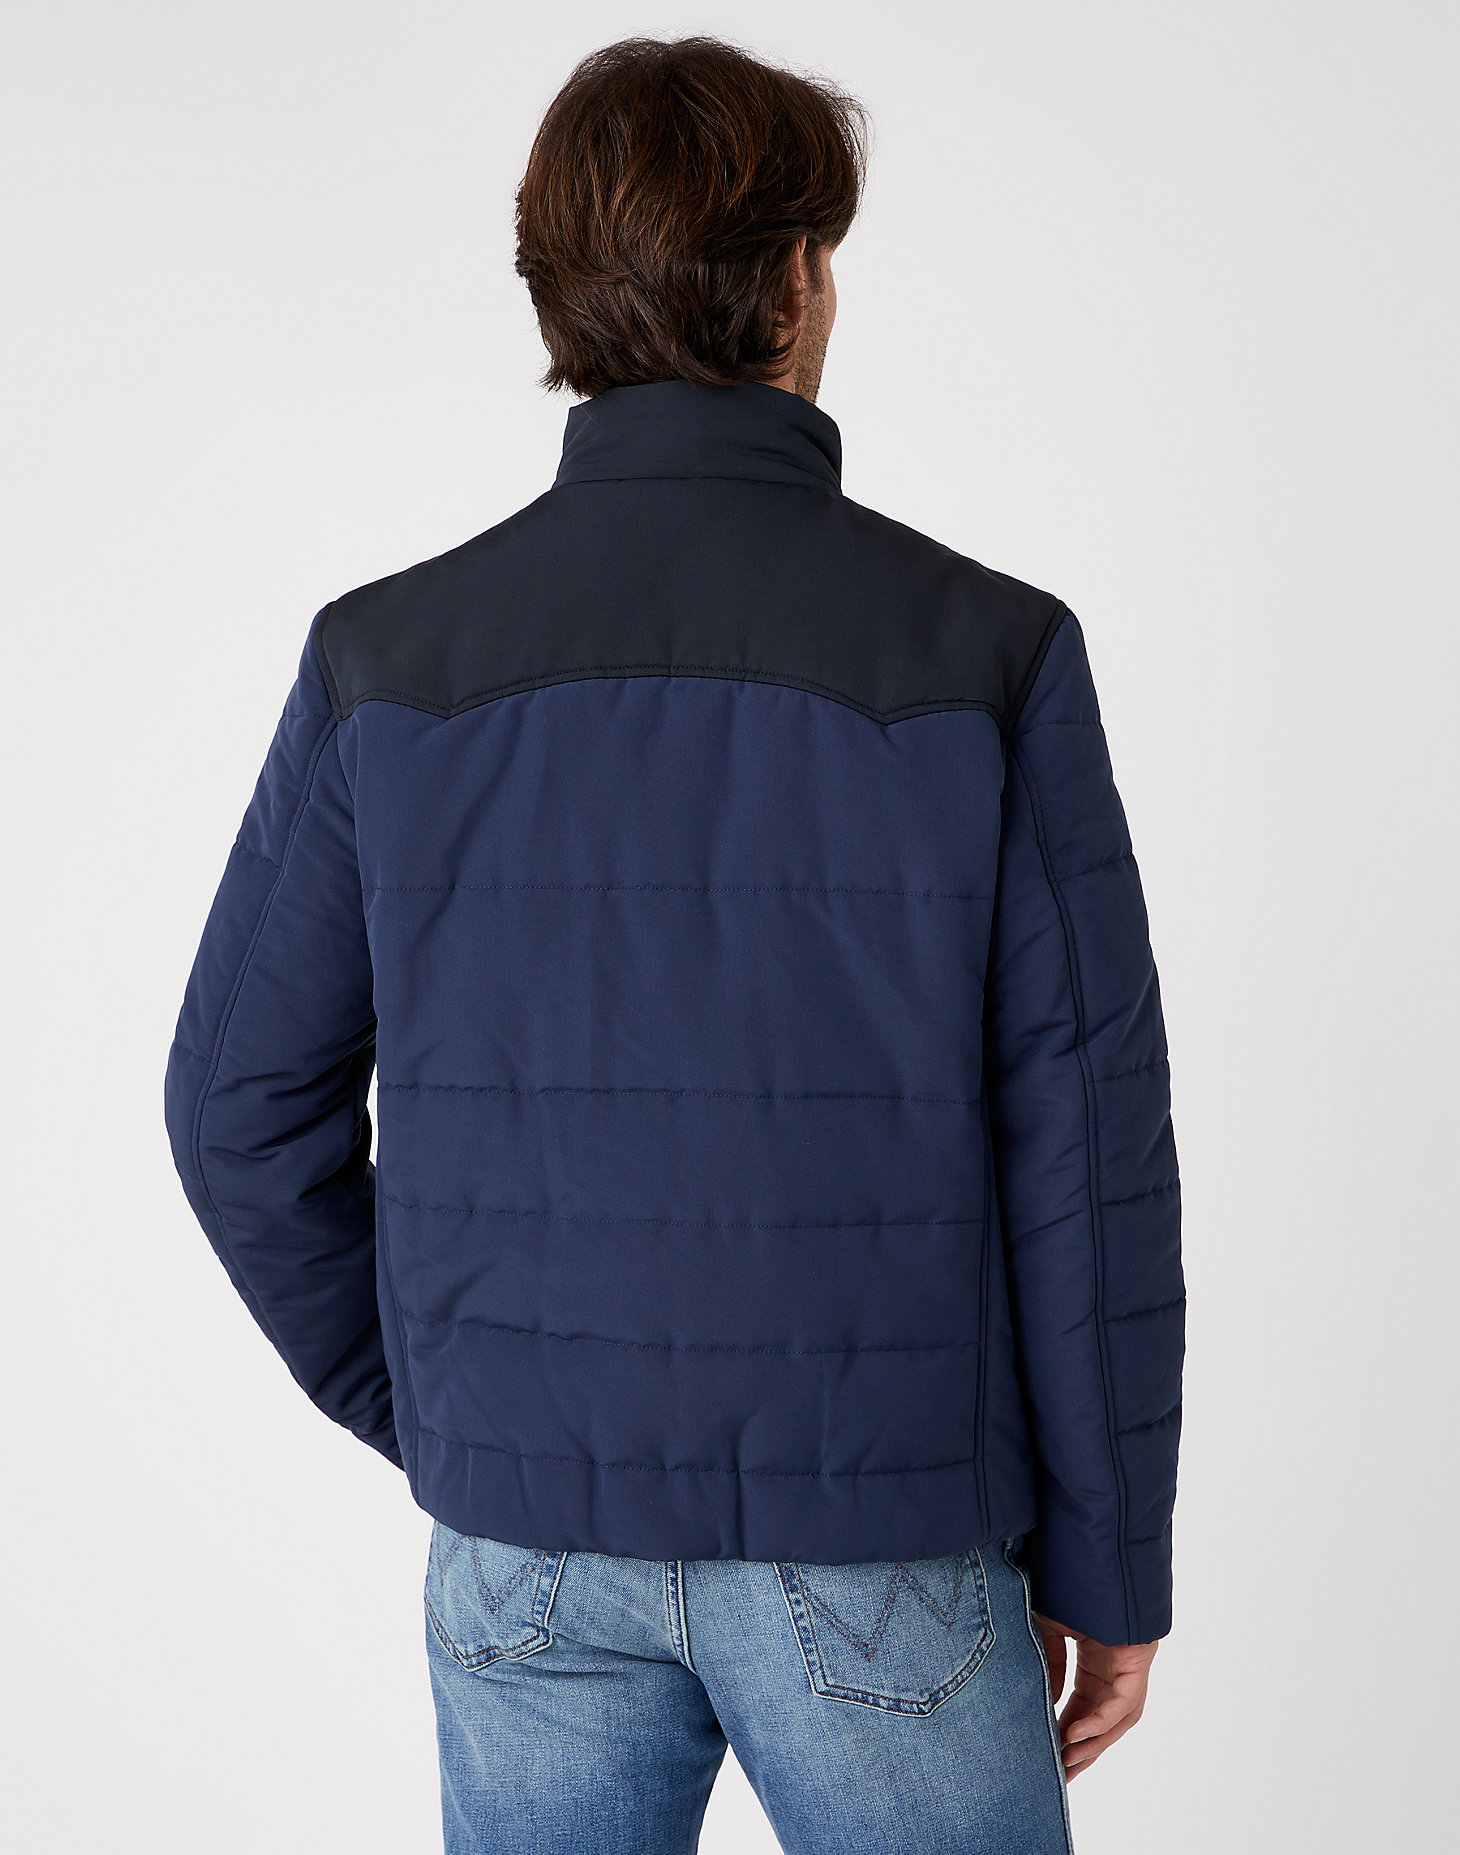 Transitional Puffer in Navy alternative view 2